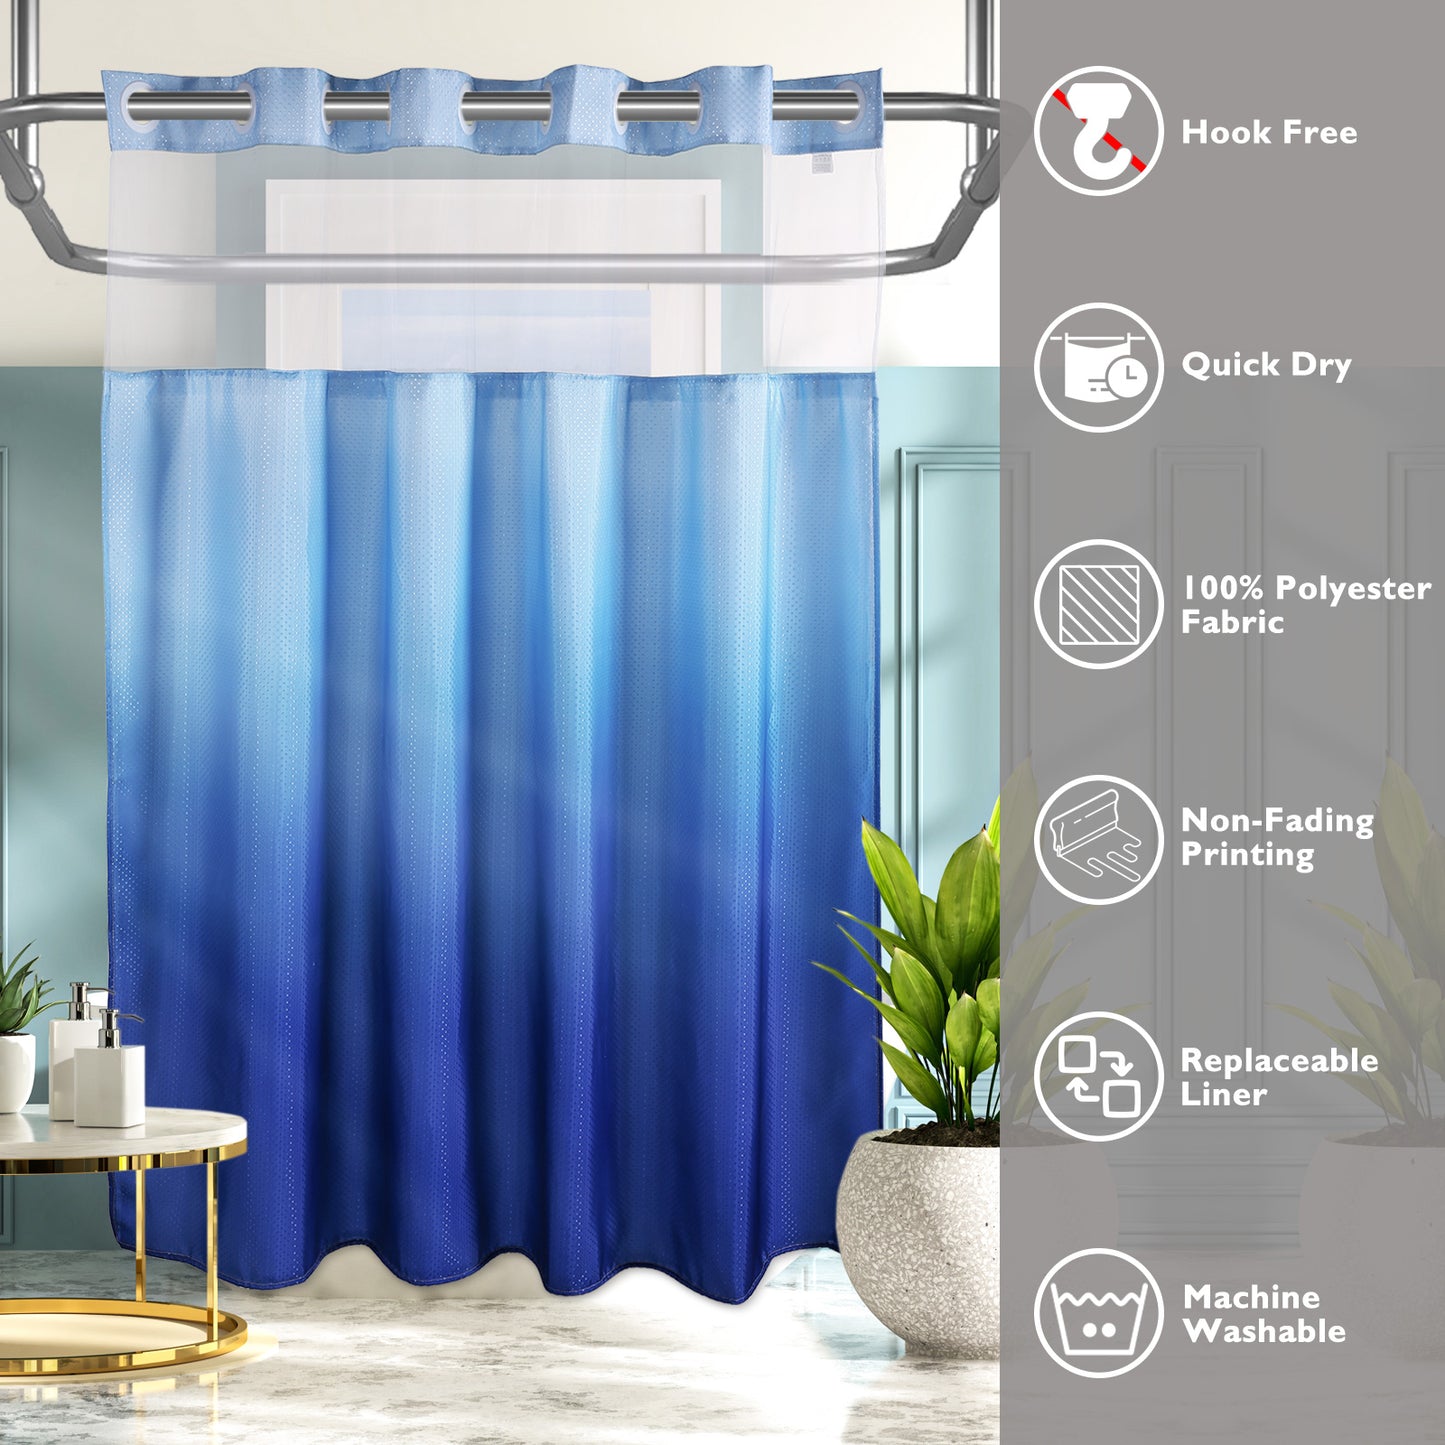 CozyHook Ombre Hook Free Shower Curtain with Snap-in Liner| Blue Gradient, 72Wx72L